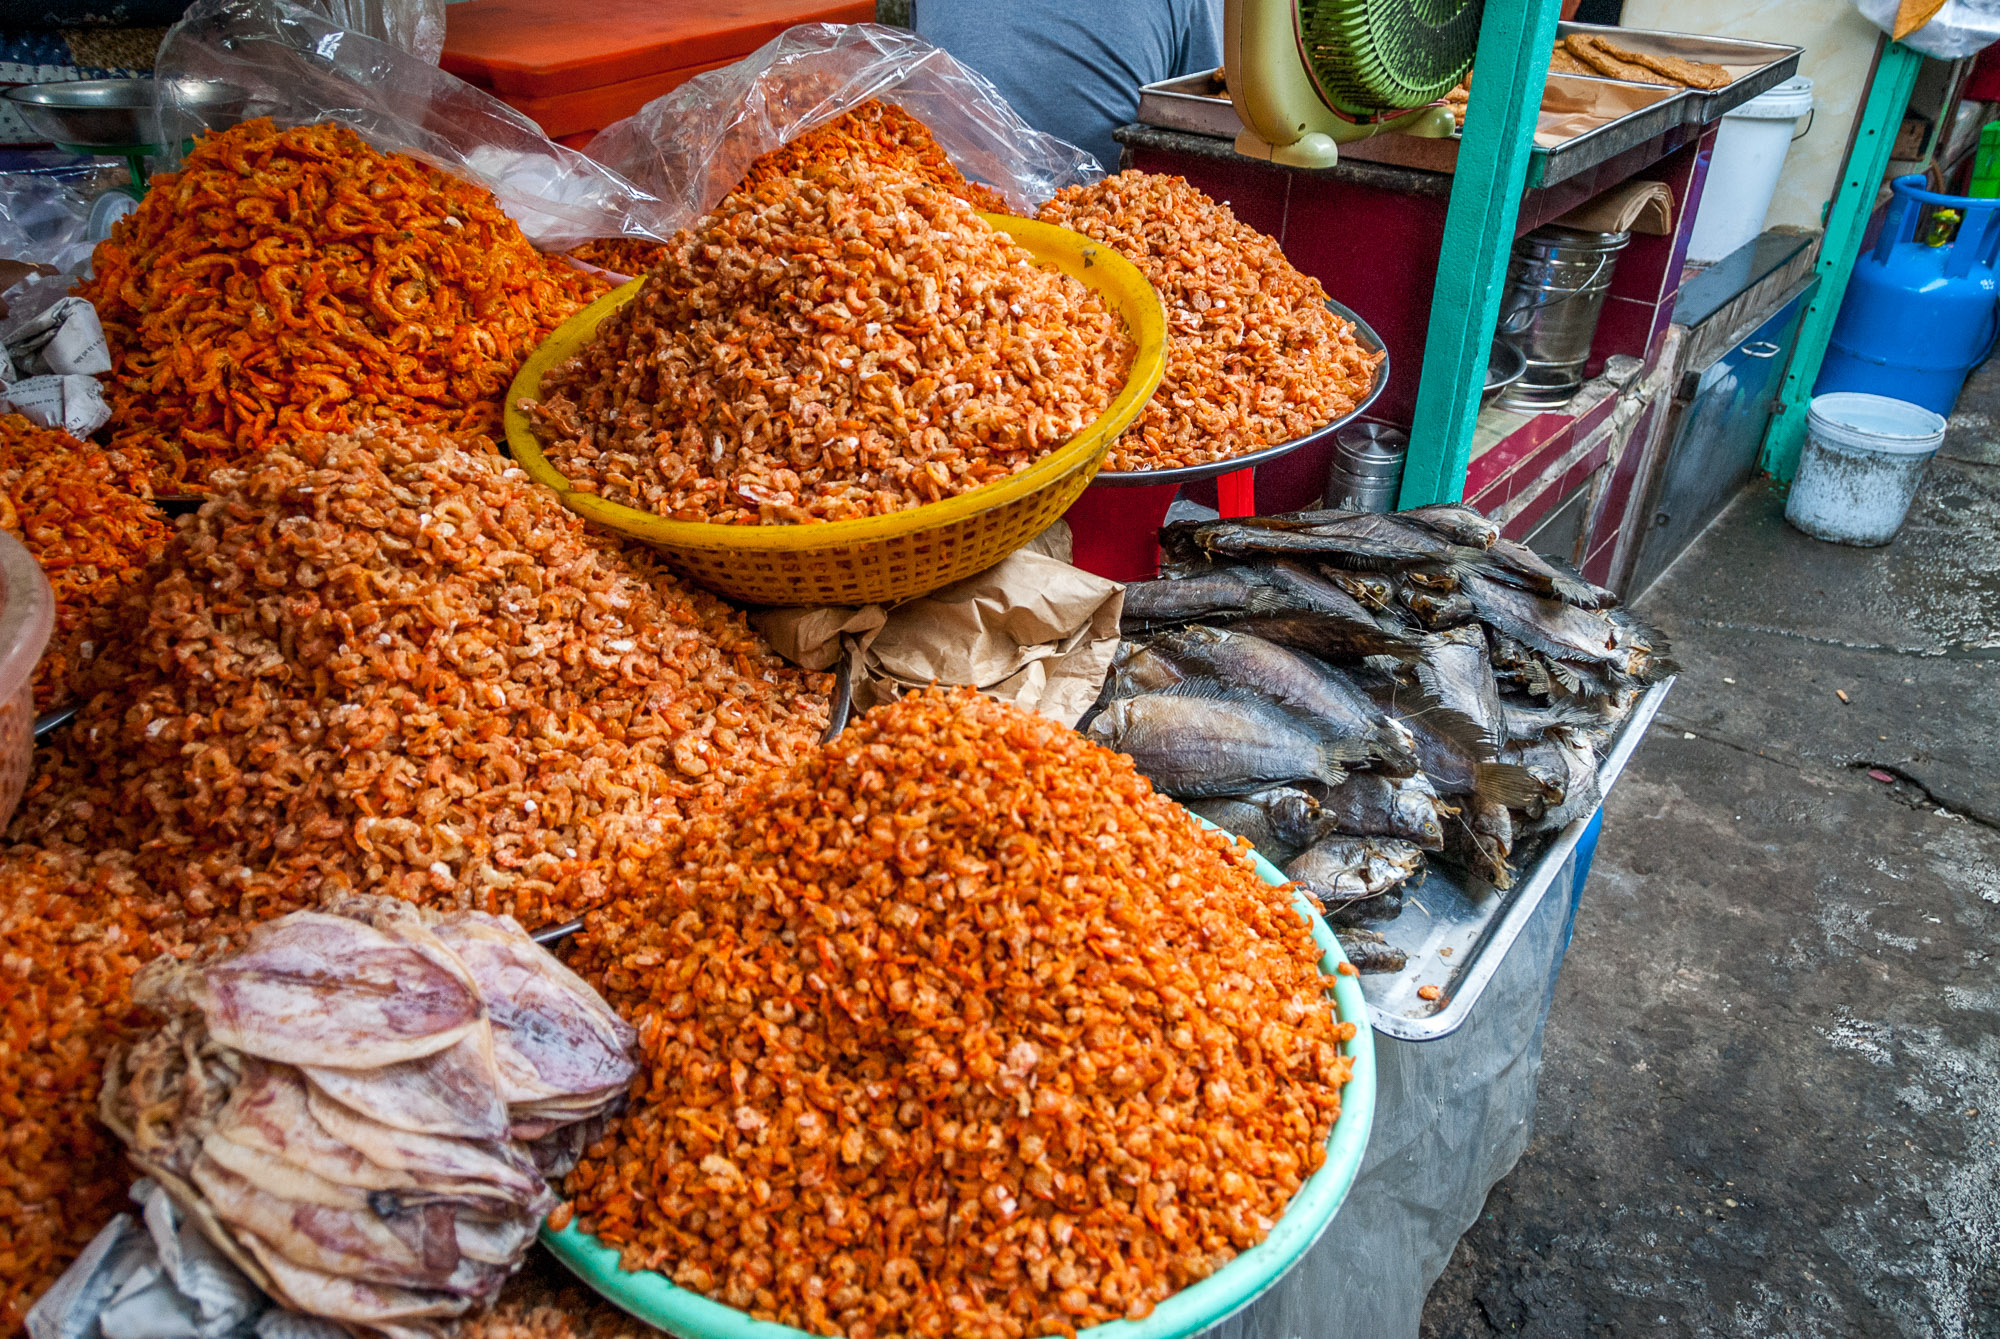 Piles of dried shrimp and other fish